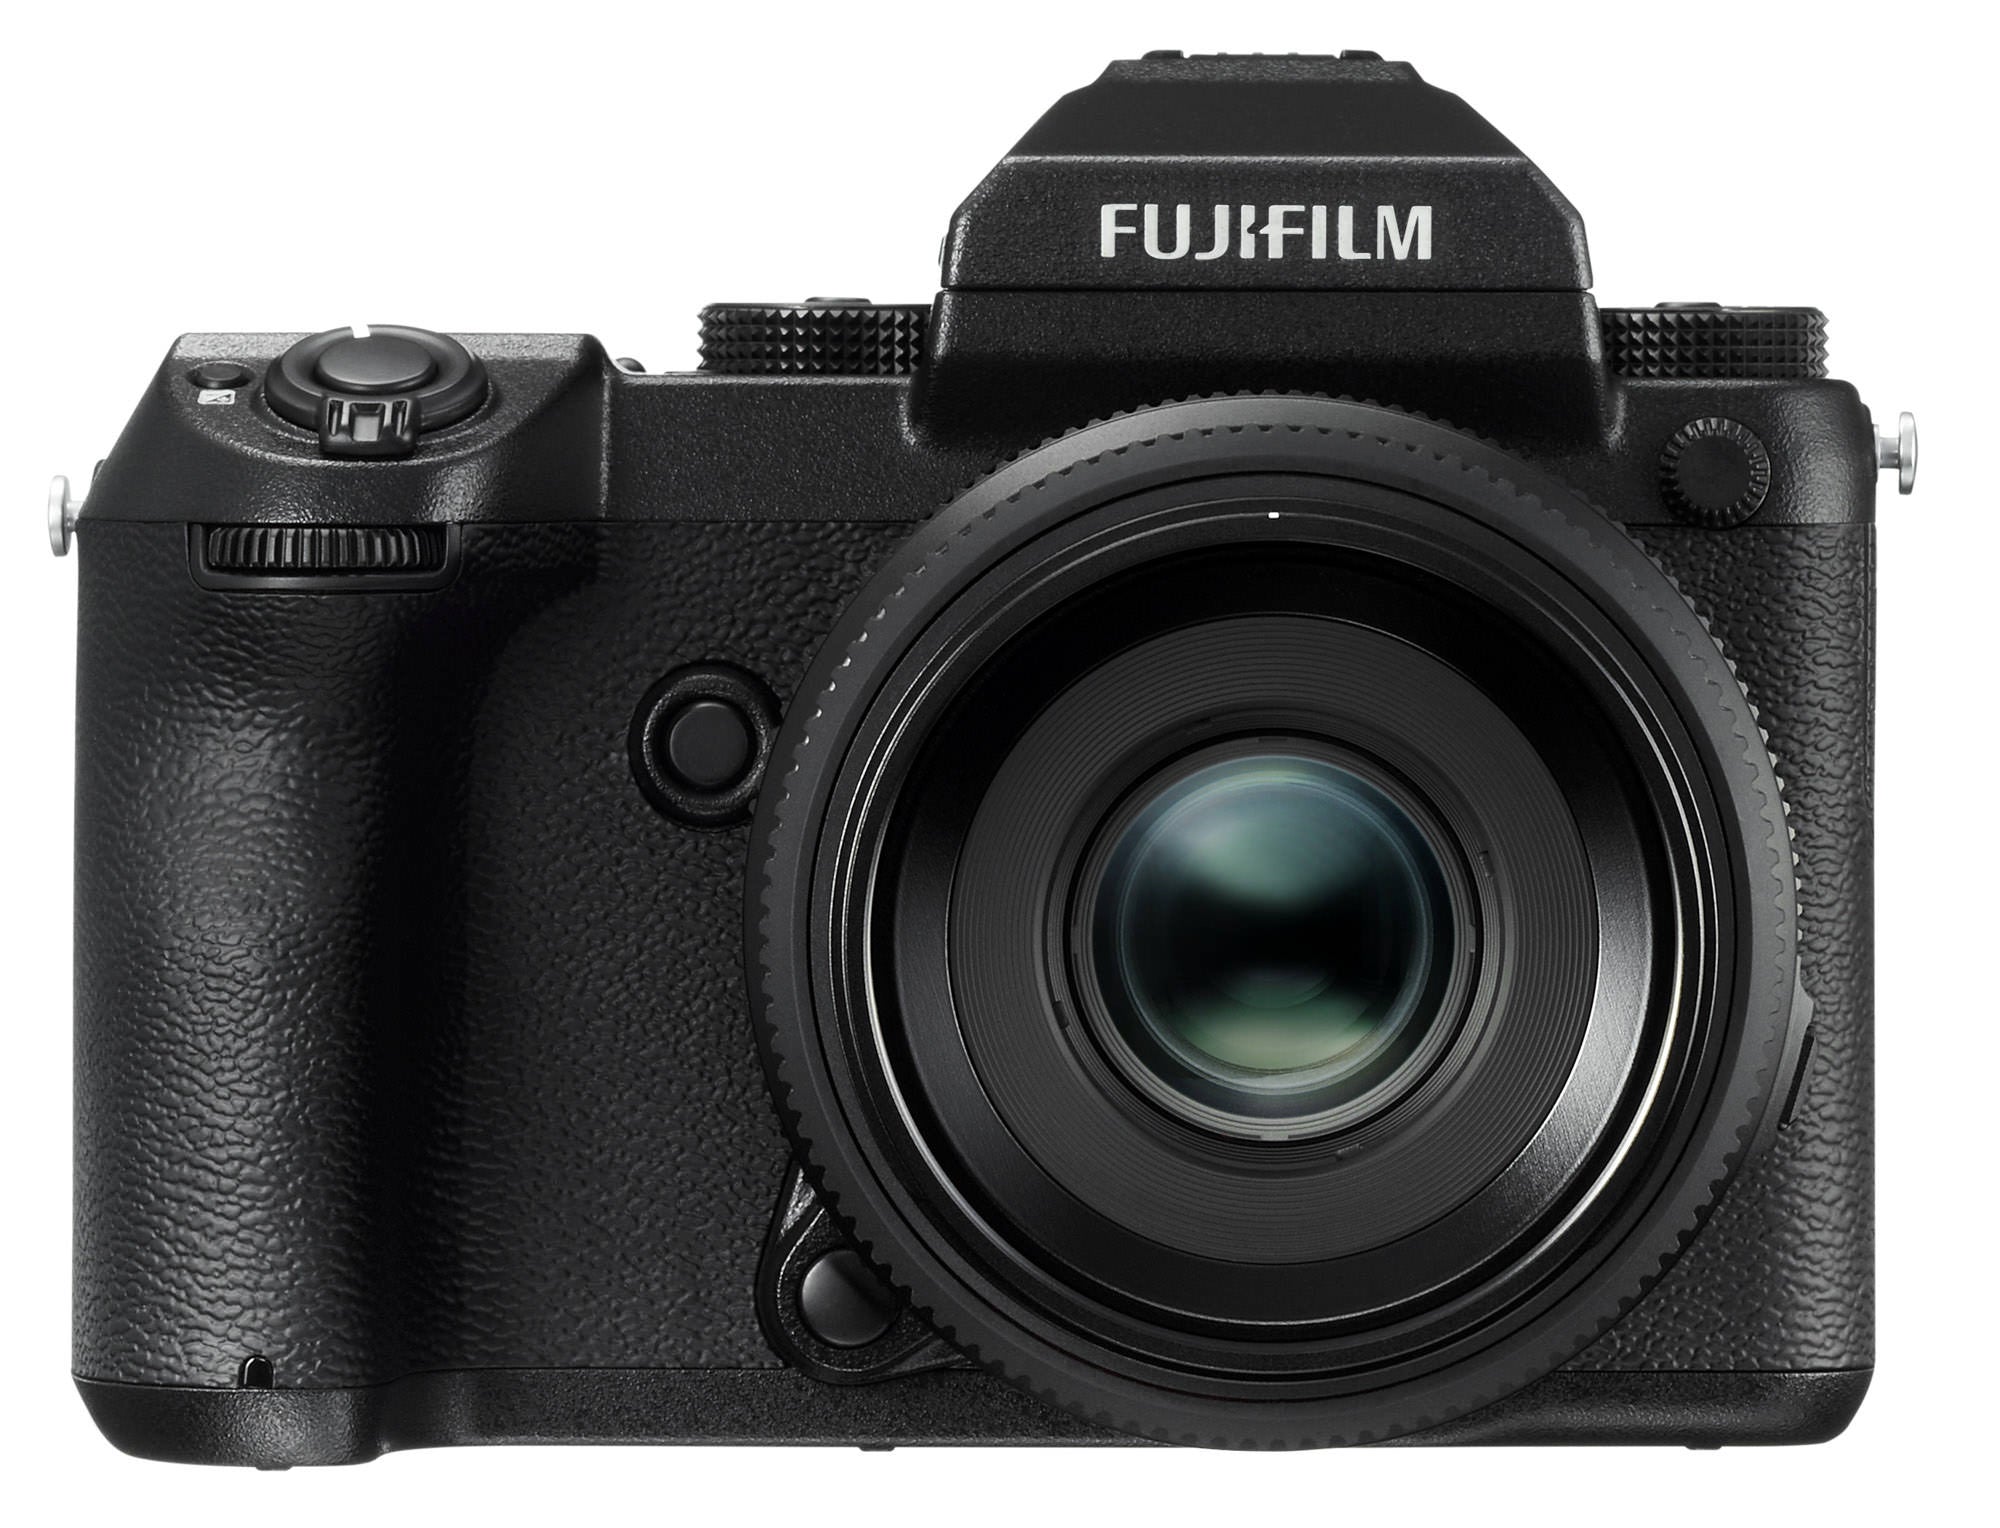 Fujifilm GFX 50S - We show you how small it is and how it will feel in your hands.